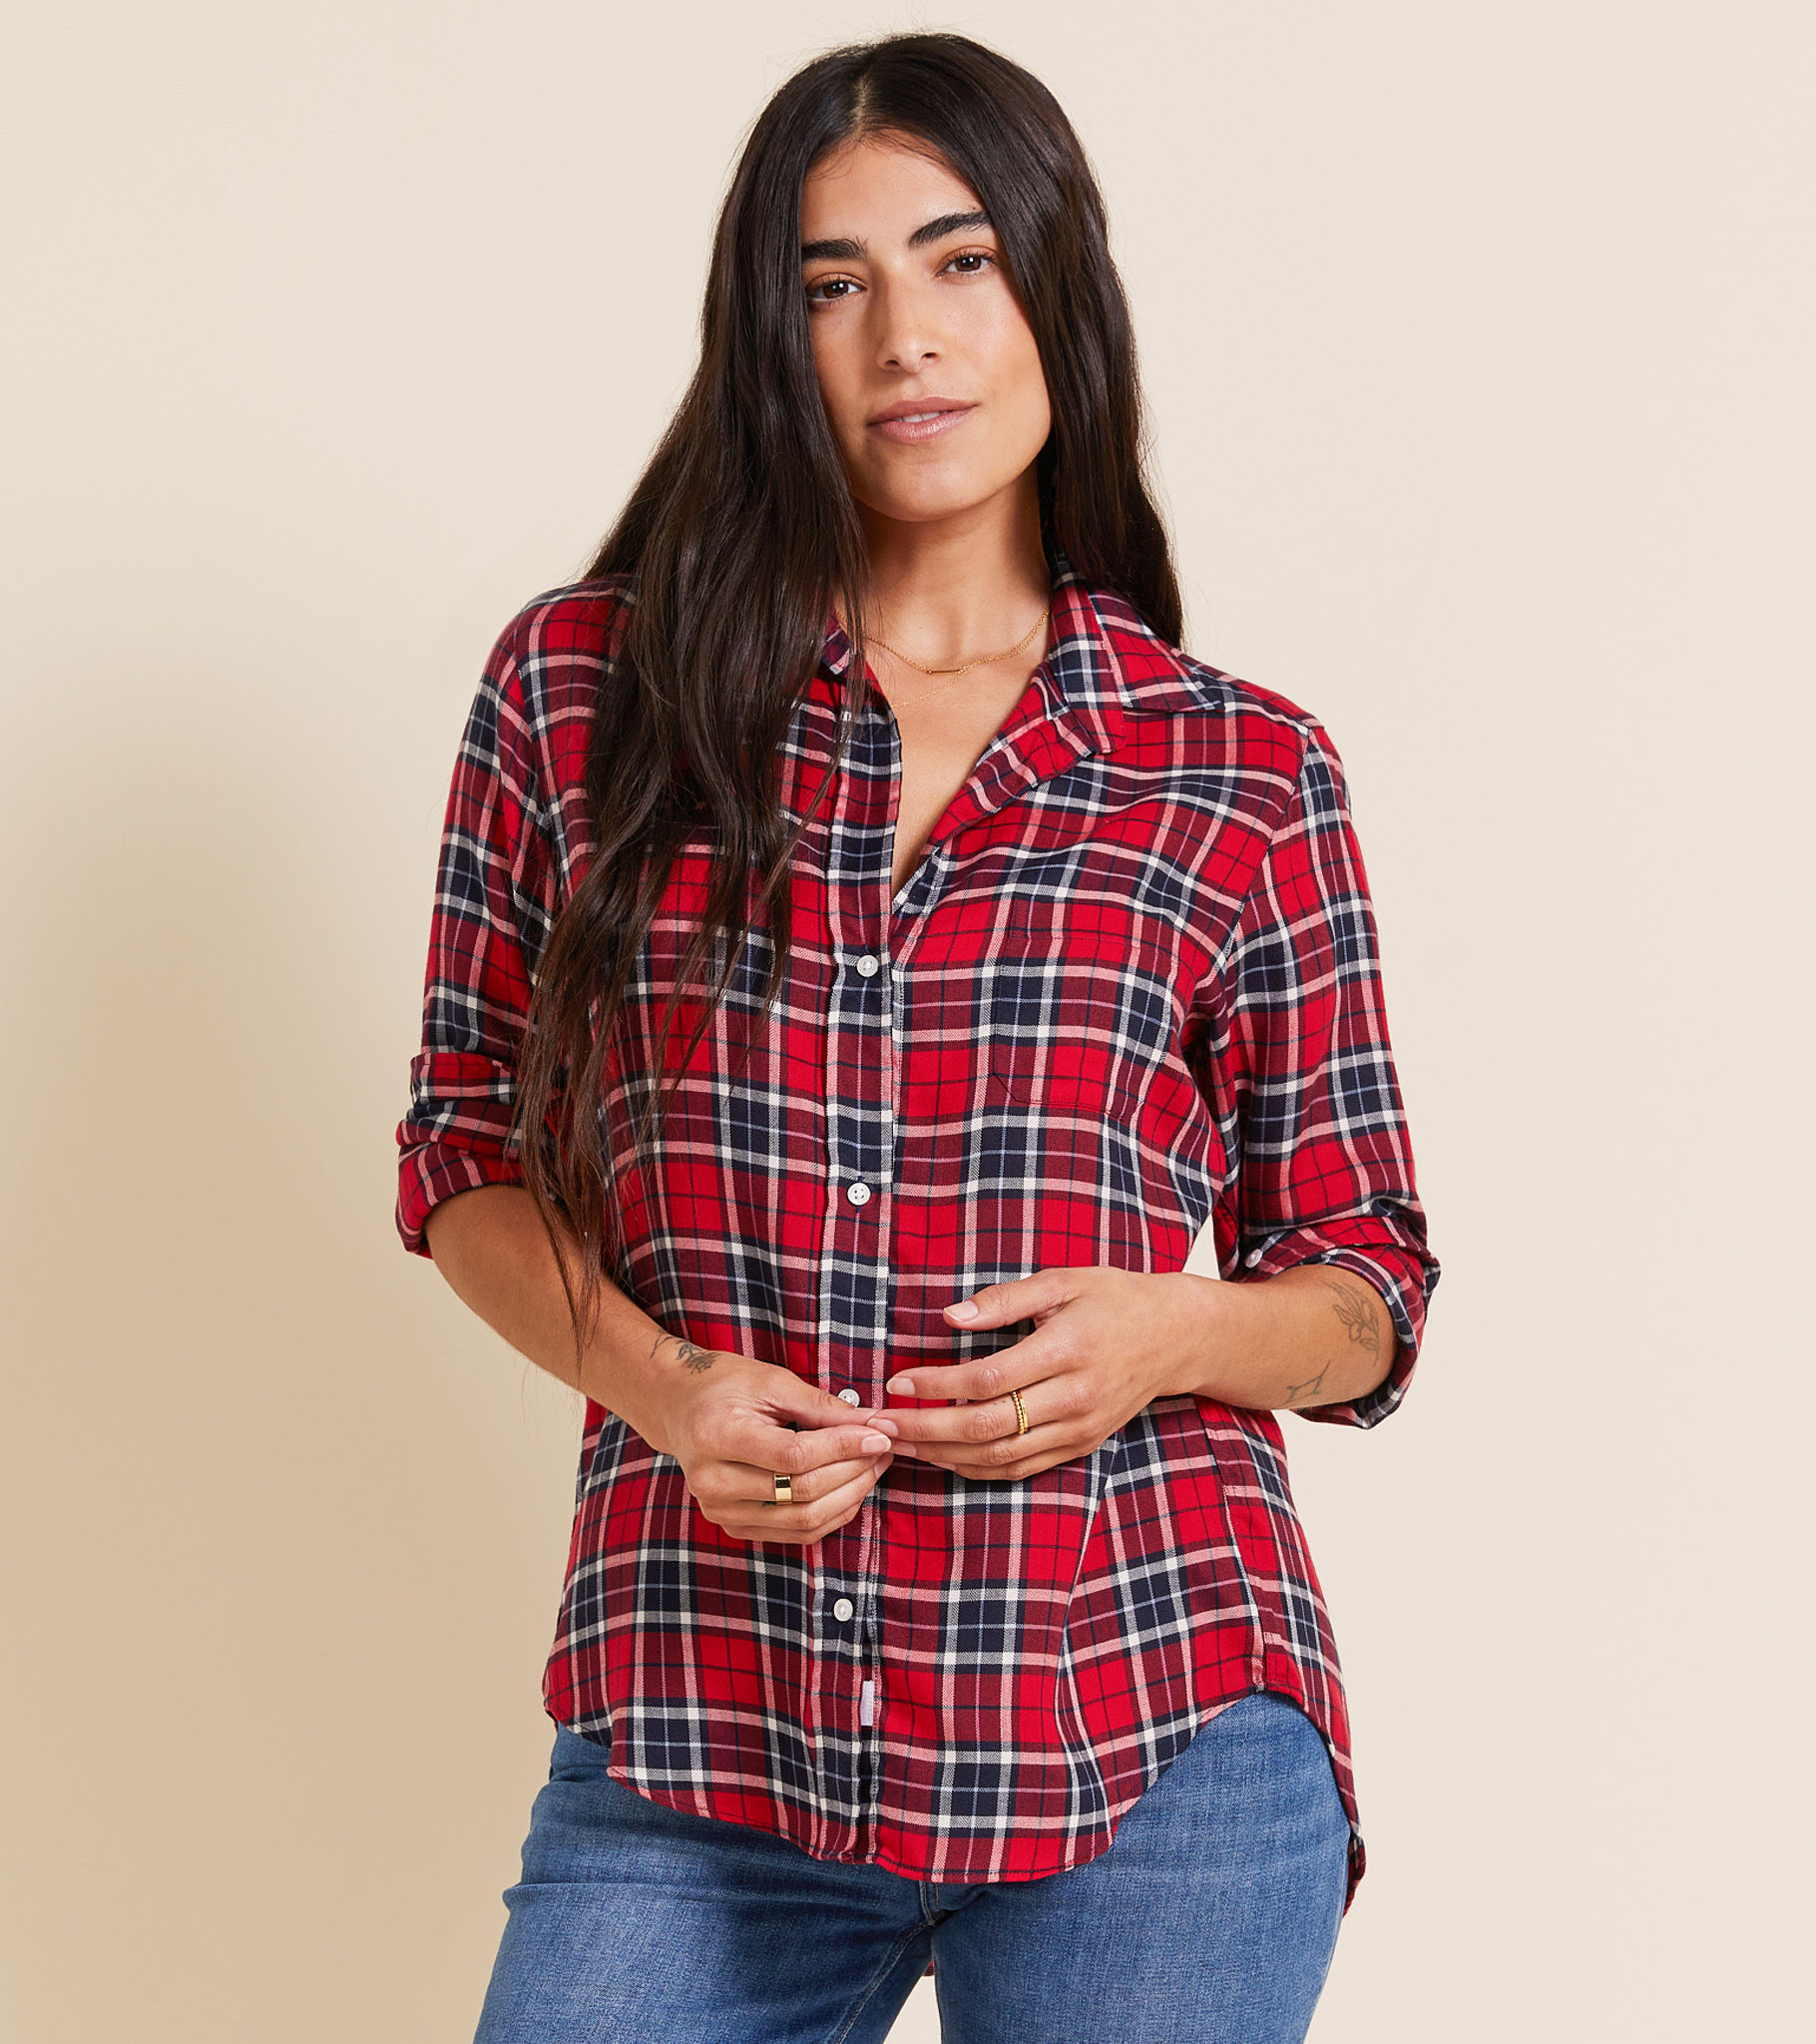 The Hero Button-Up Shirt Red, Navy, and White Plaid, Liquid Flannel Final Sale view 1